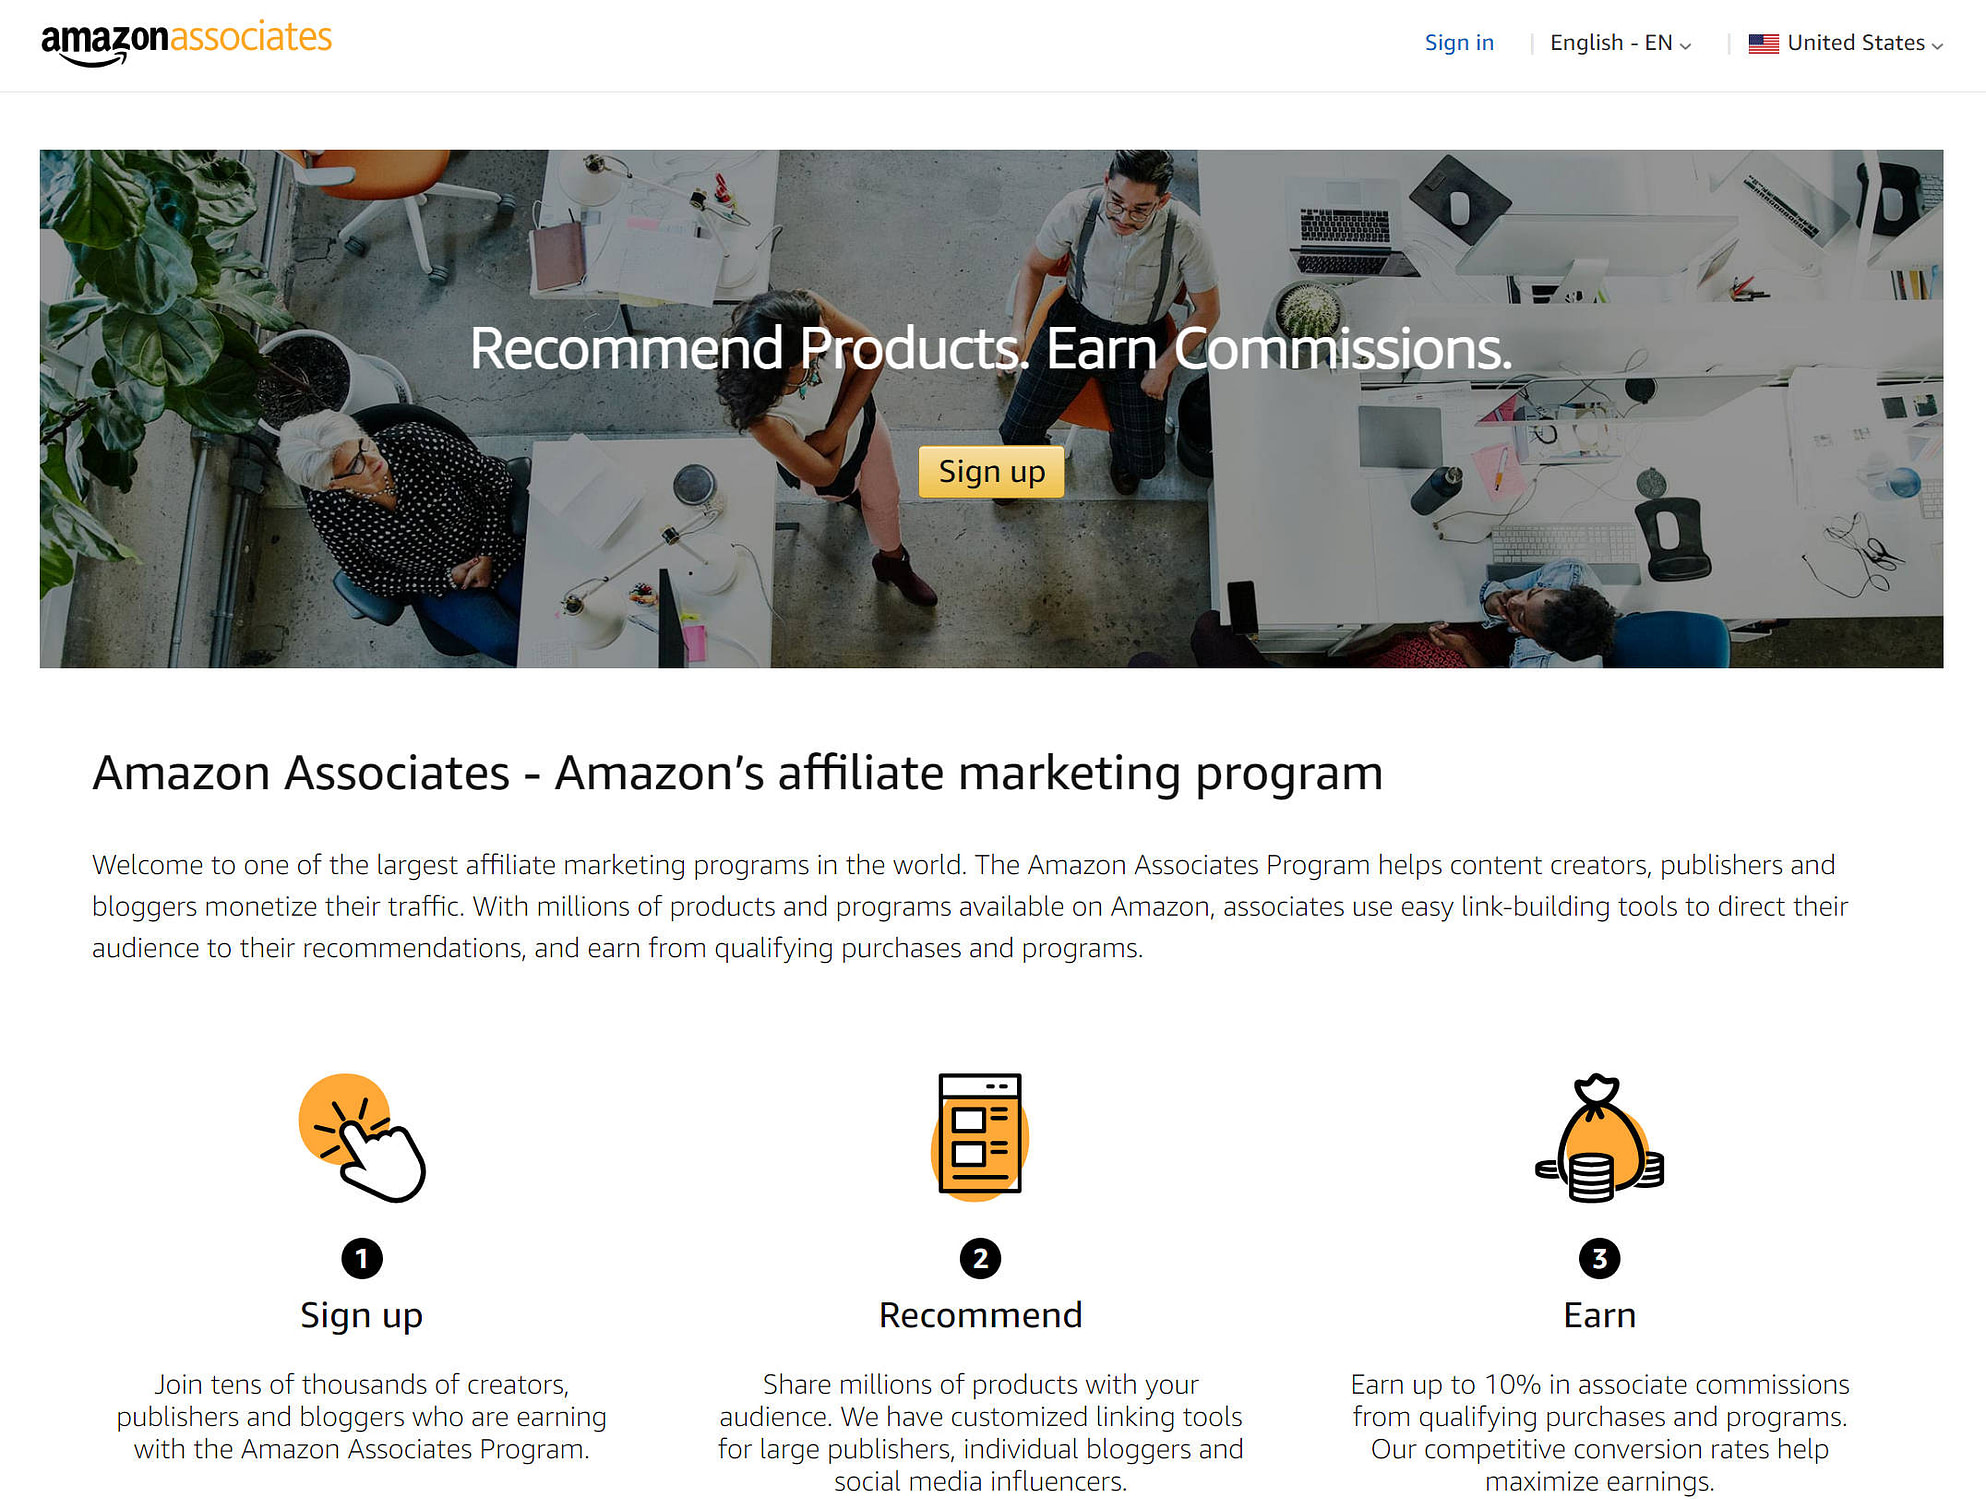 How to become an Amazon affiliate